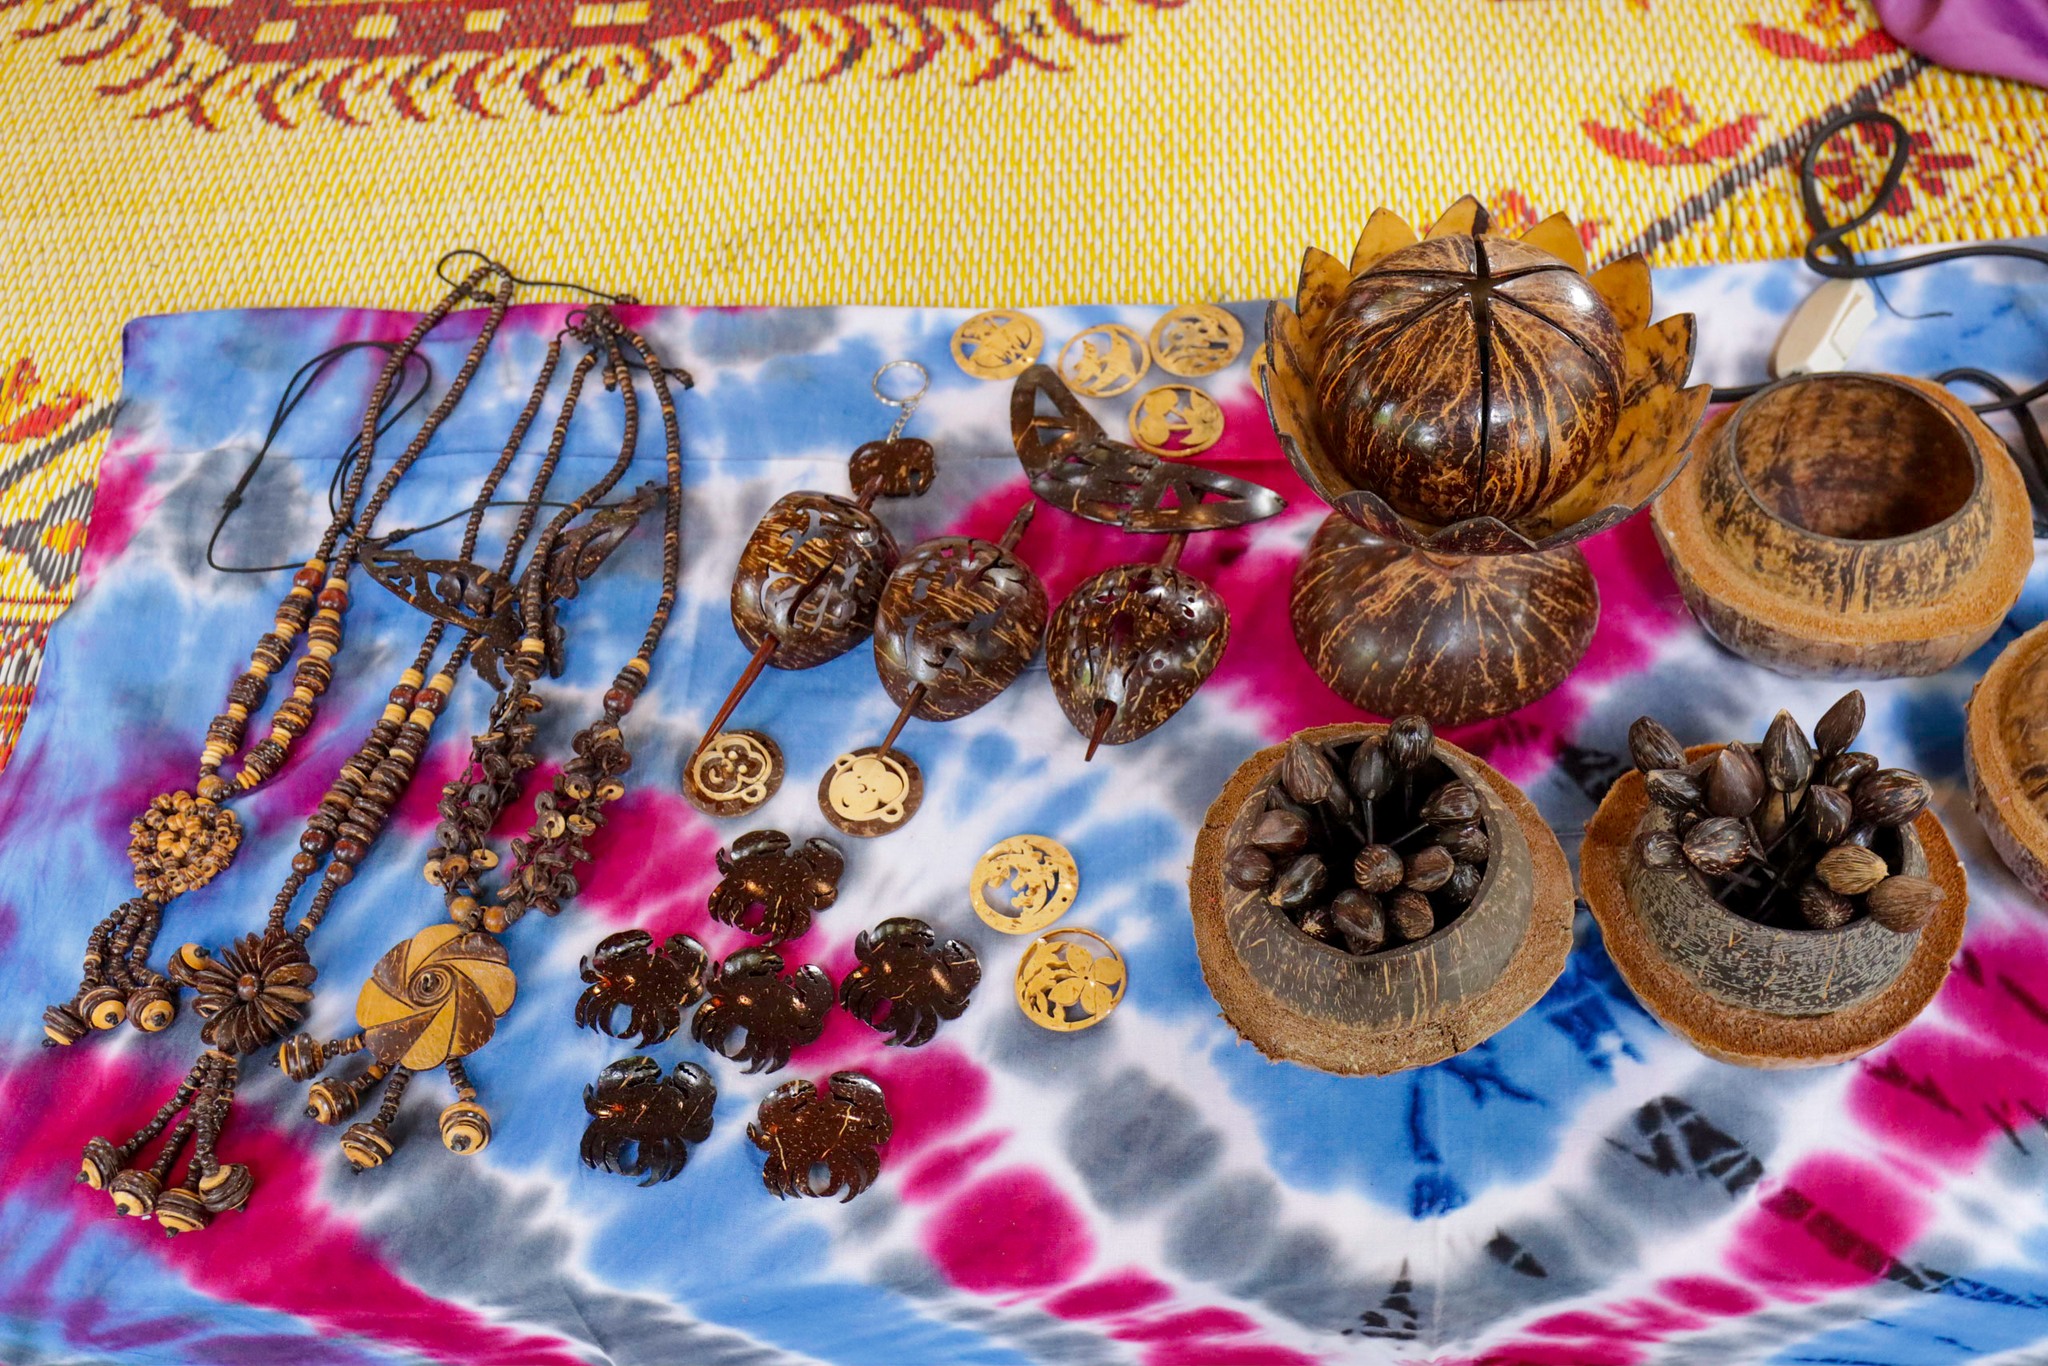 Ladprateen, Ban Nateen, the products from coconut shells